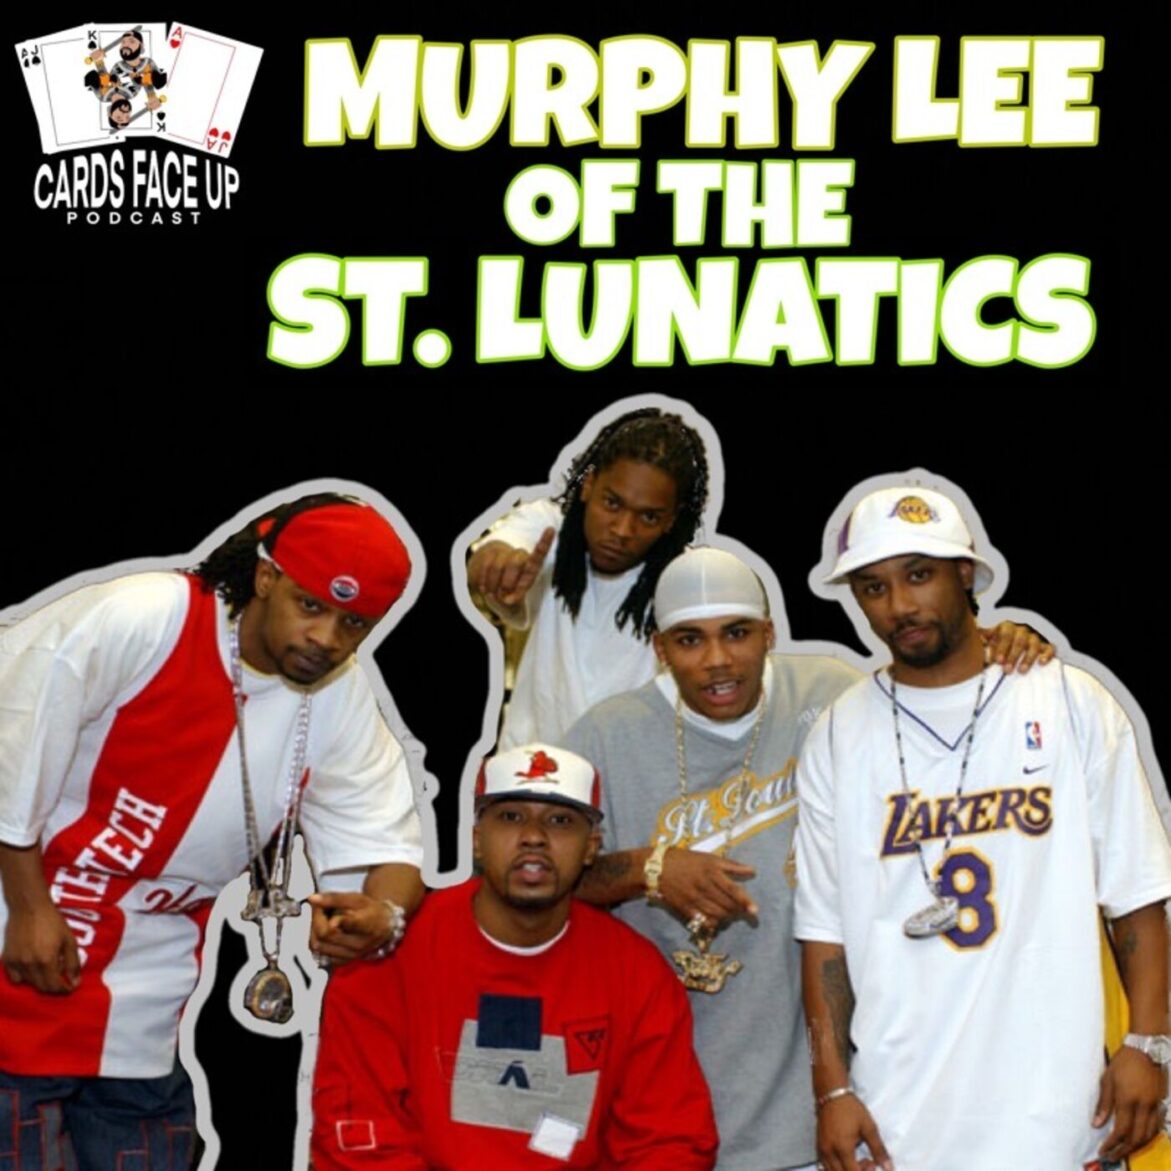 Black Podcasting - Murphy Lee From The St. Lunatics talks PAST, FUTURE AND PRESENT